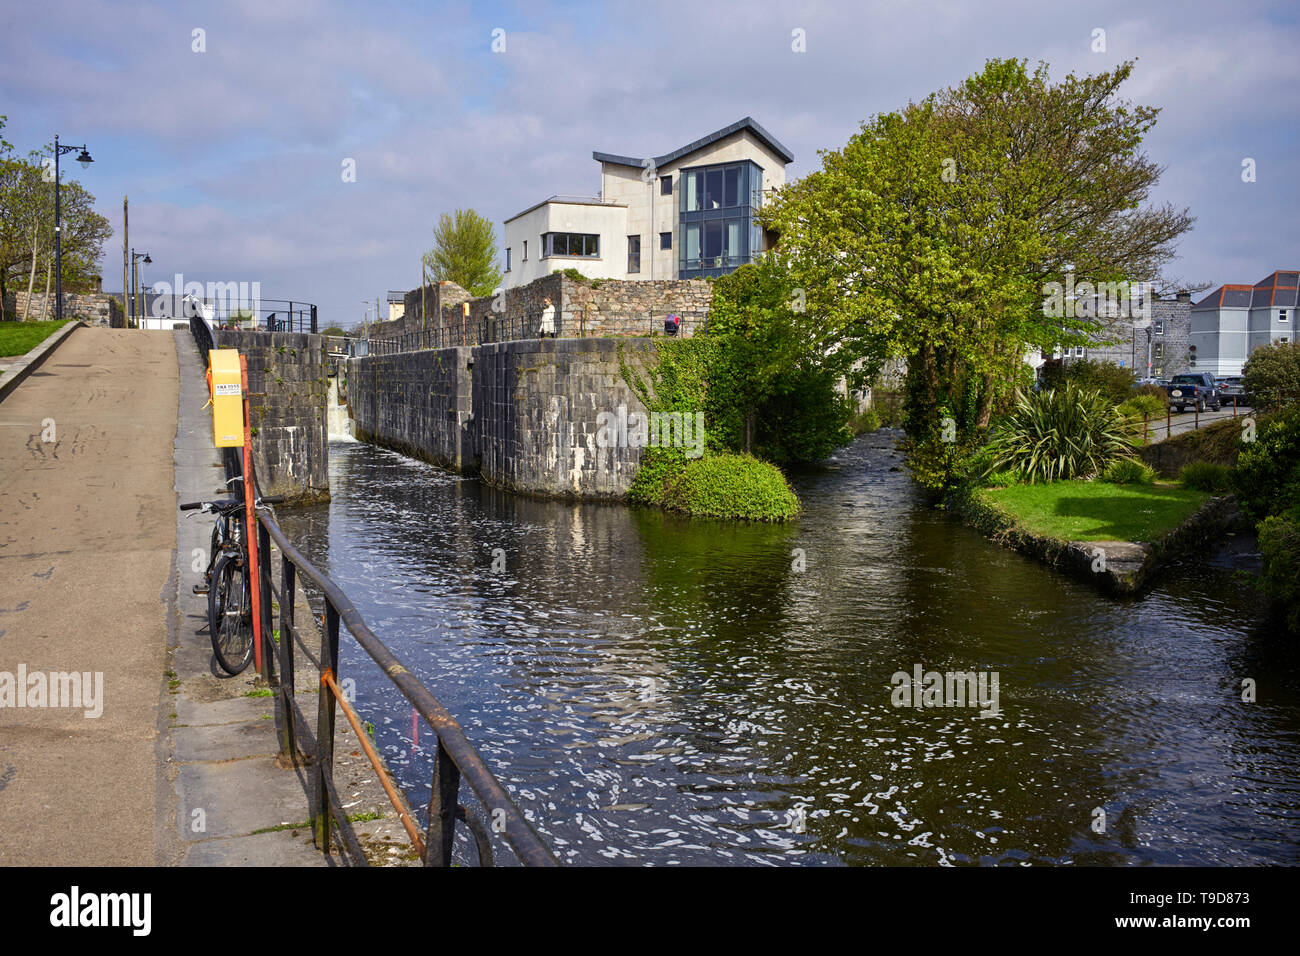 The old canal and lock at Nun’s Island area of Galway, Ireland Stock Photo